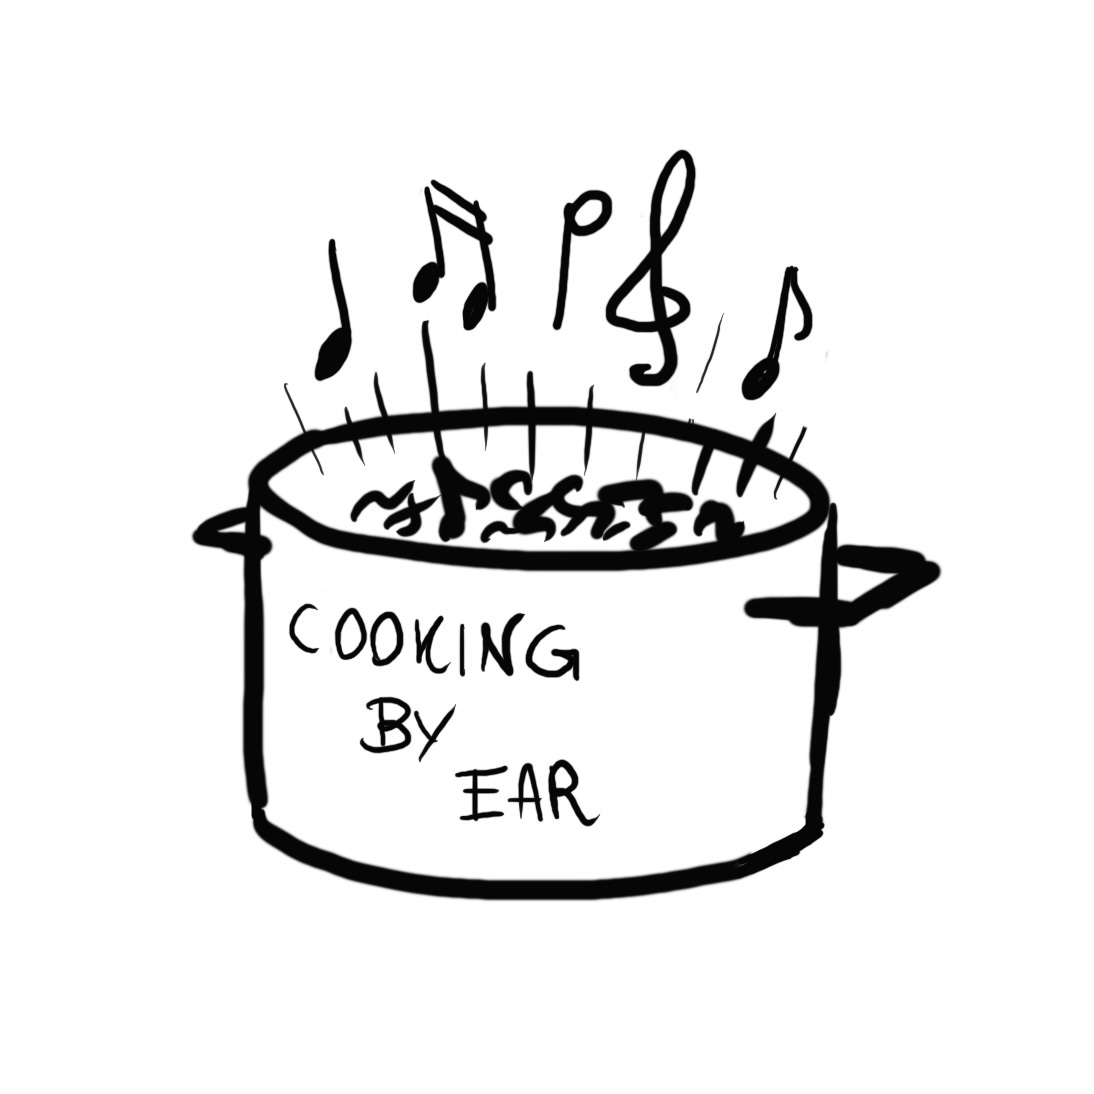 Artwork for Cooking by Ear